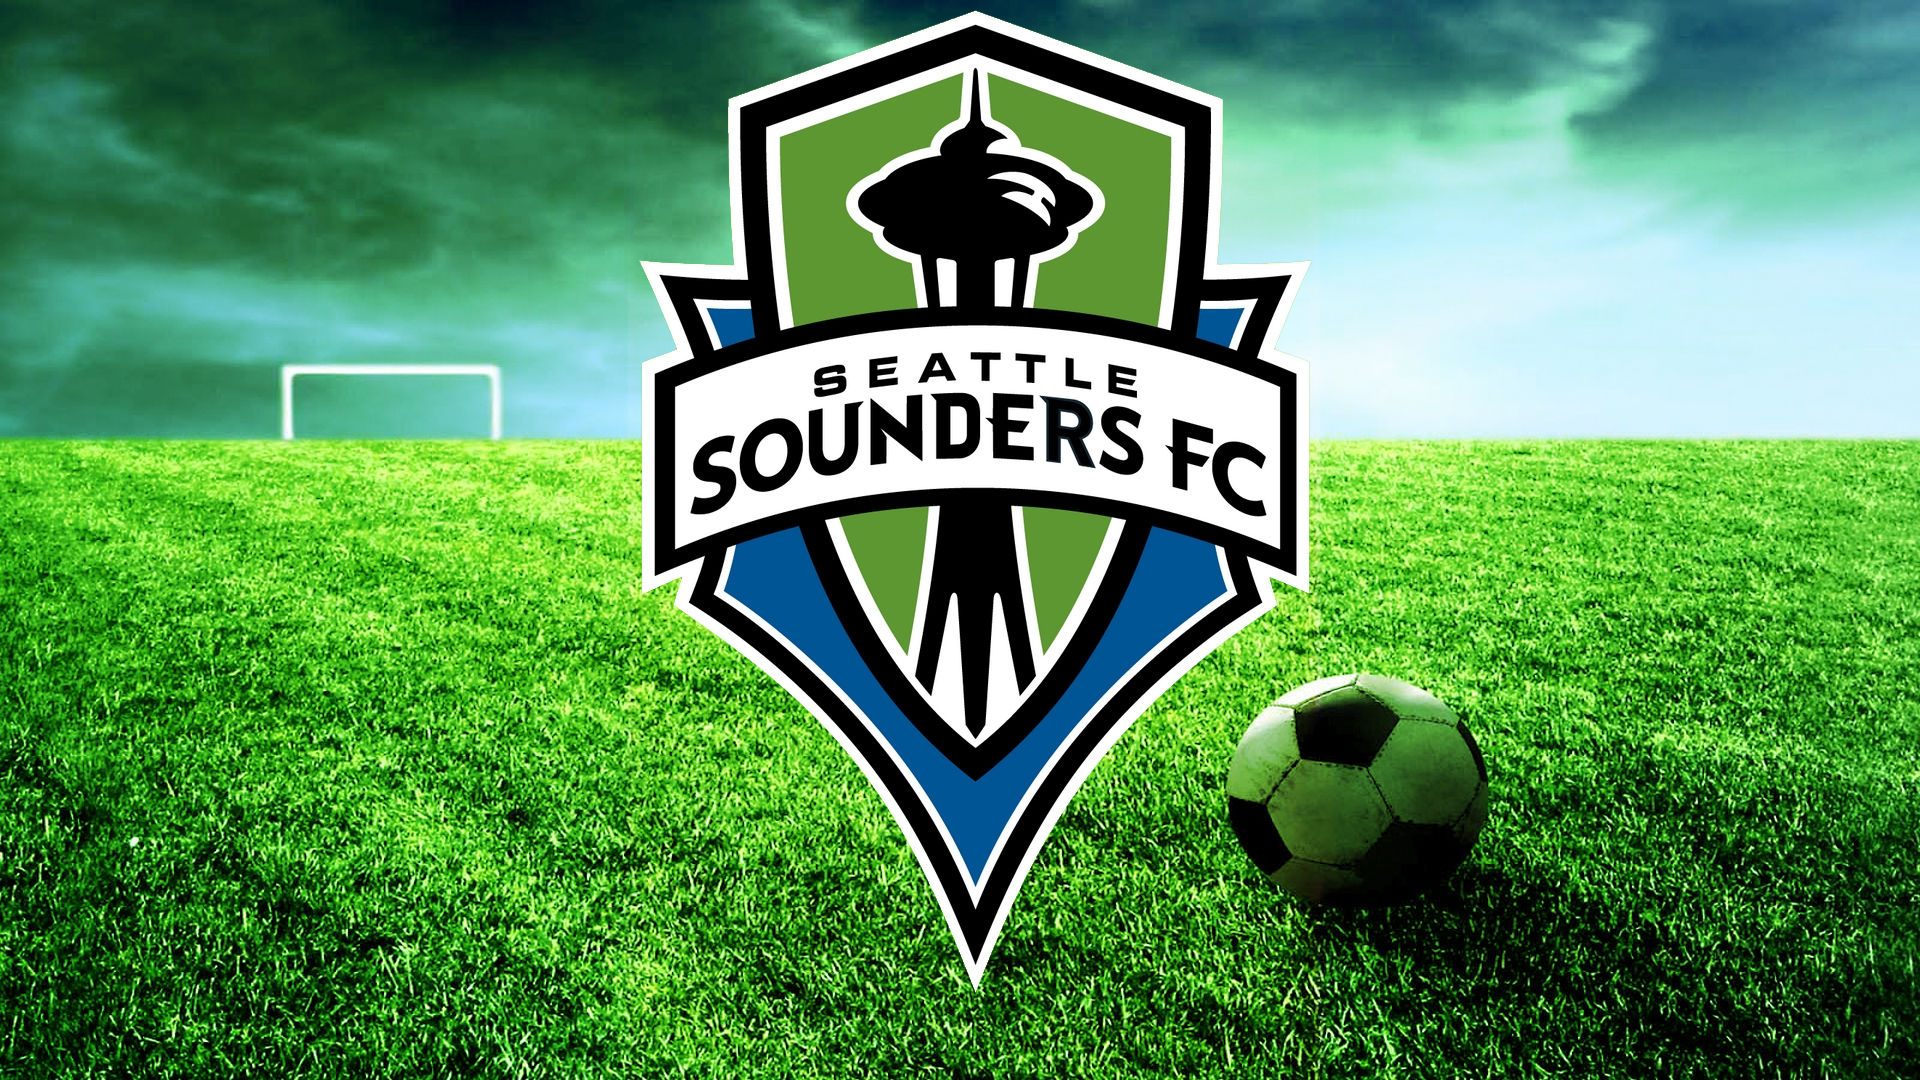 Seattle Sounders FC HD Wallpaper | Background Image ...